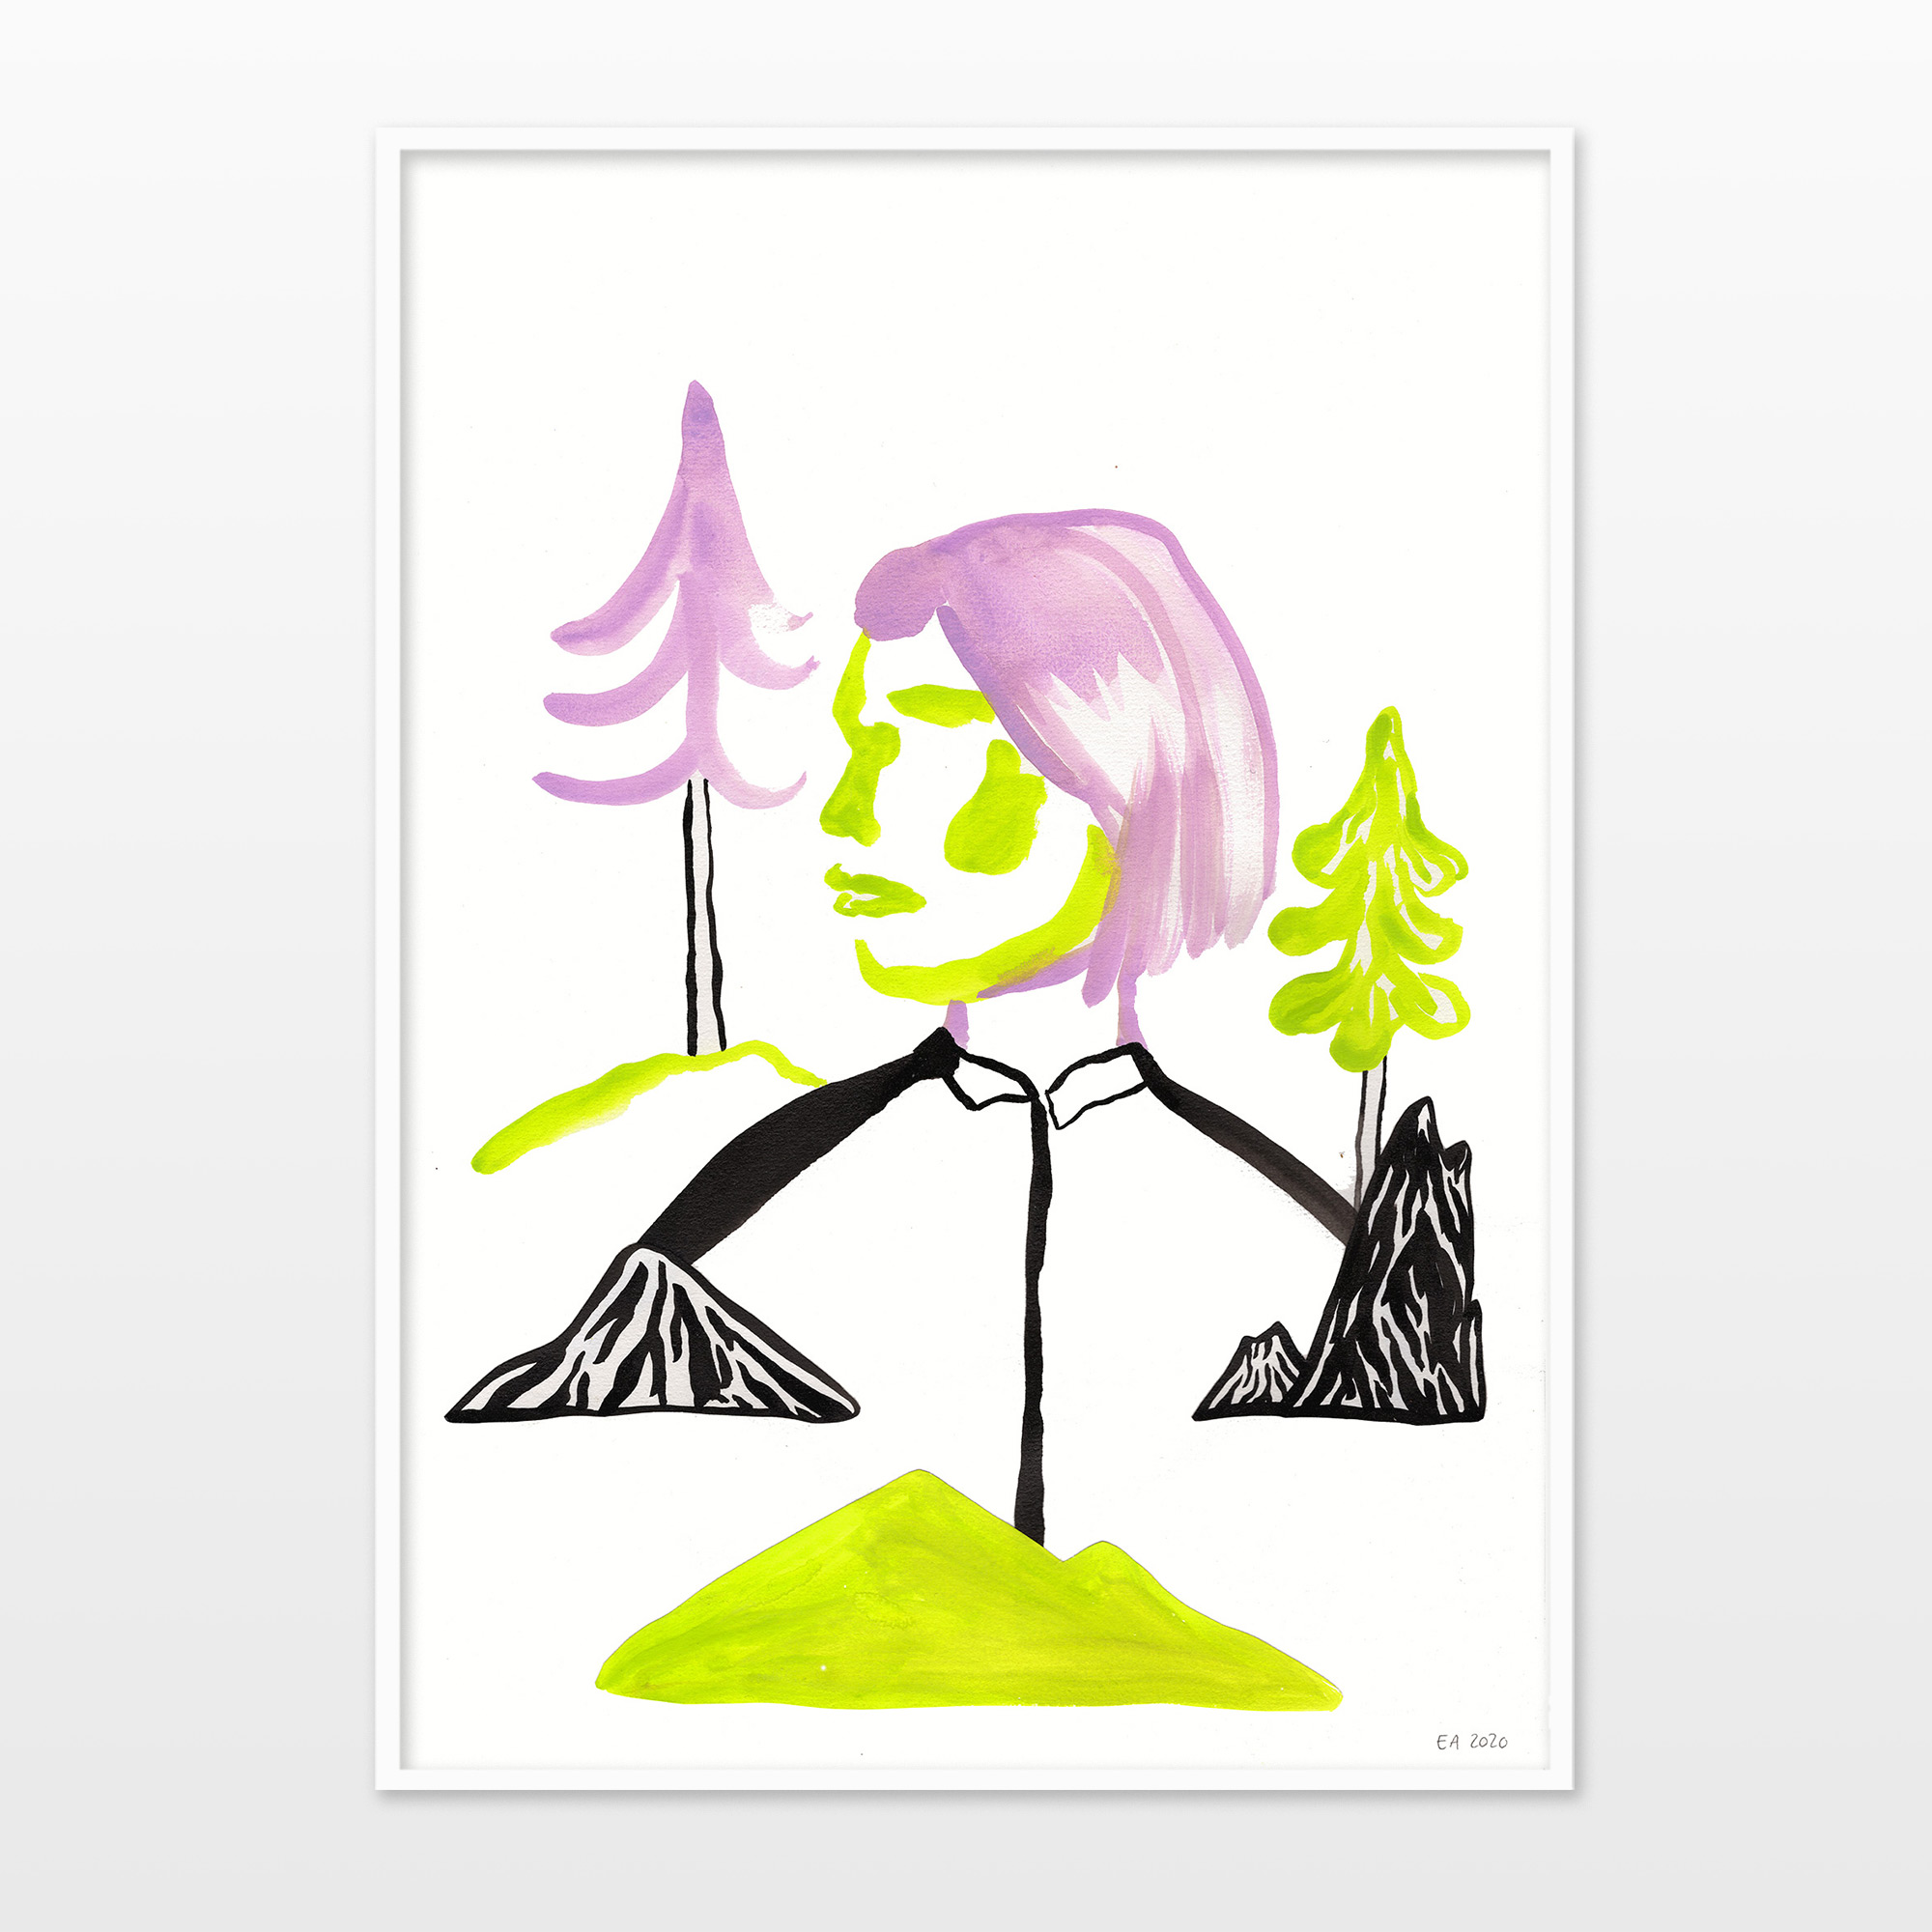 drawings, gouache-painting, watercolor-paintings, aesthetic, graphical, minimalistic, pop, animals, botany, nature, people, black, green, violet, gouache, ink, paper, beautiful, danish, decorative, design, forest, interior, interior-design, modern, modern-art, mountains, nordic, posters, pretty, prints, scandinavien, trees, Buy original high quality art. Paintings, drawings, limited edition prints & posters by talented artists.